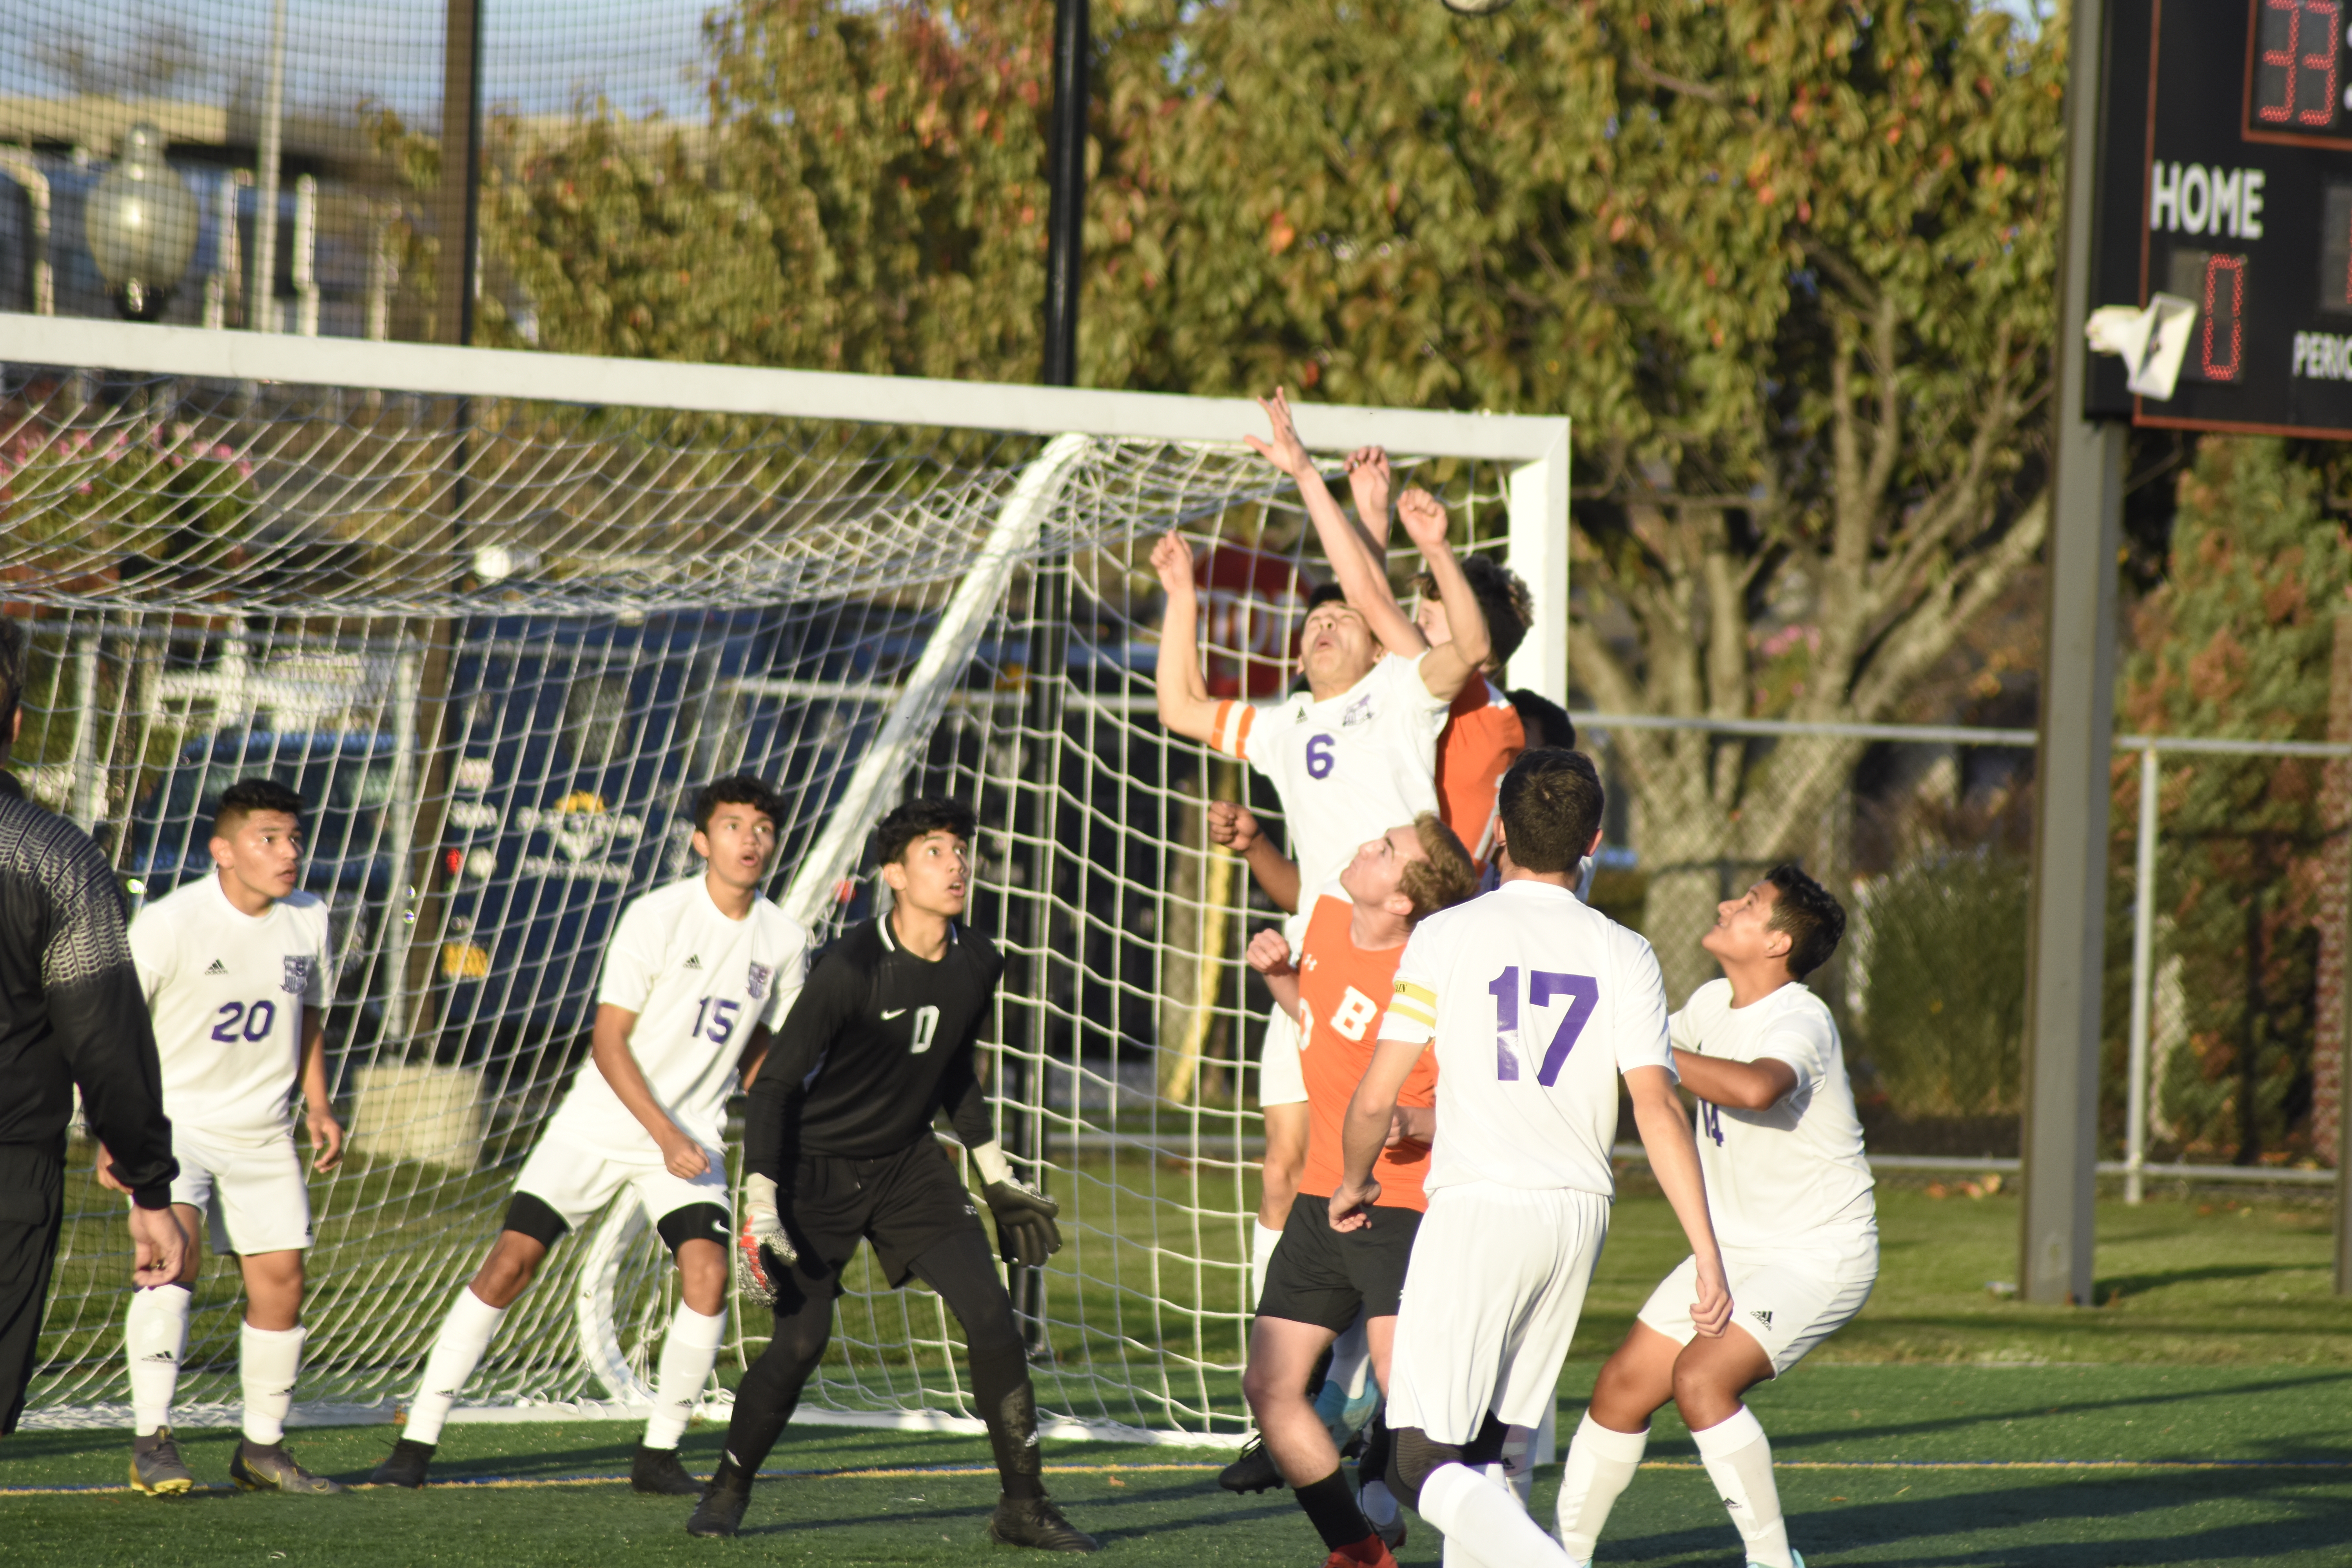 Hampton Bays senior Milan Moraga goes up and tries to clear a corner kick. The Baymen could not clear the ball, leading to the lone goal of the game.